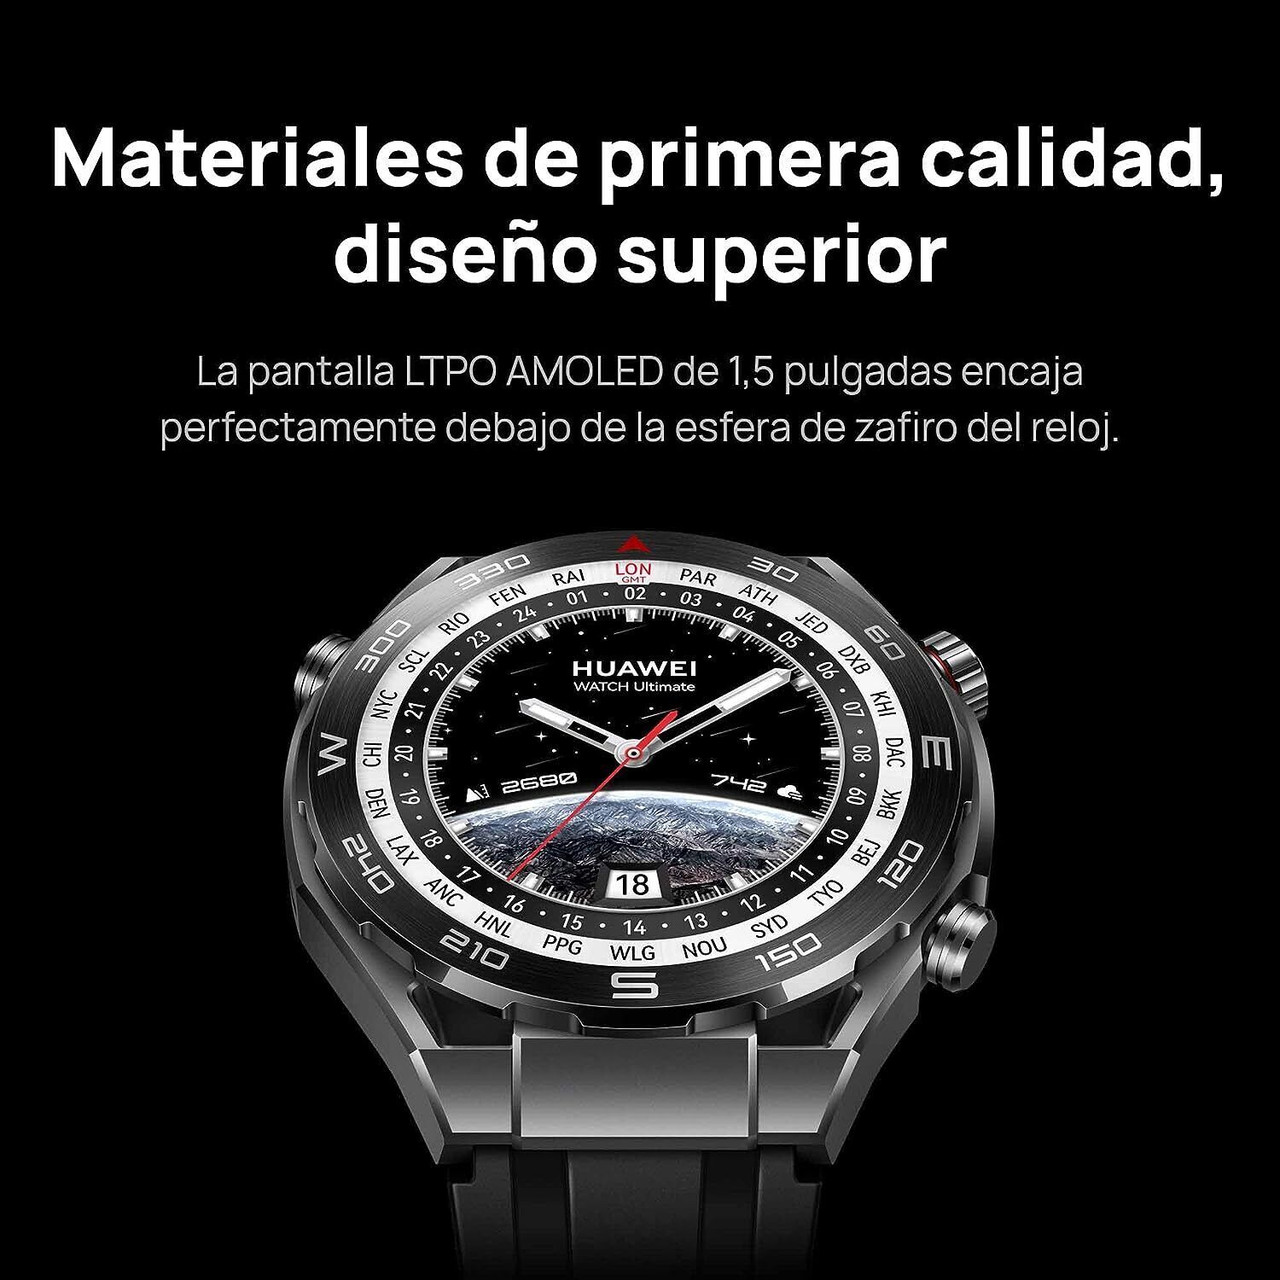 HONOR Watch 4 Pro with 1.5″ LTPO AMOLED screen, Stainless steel